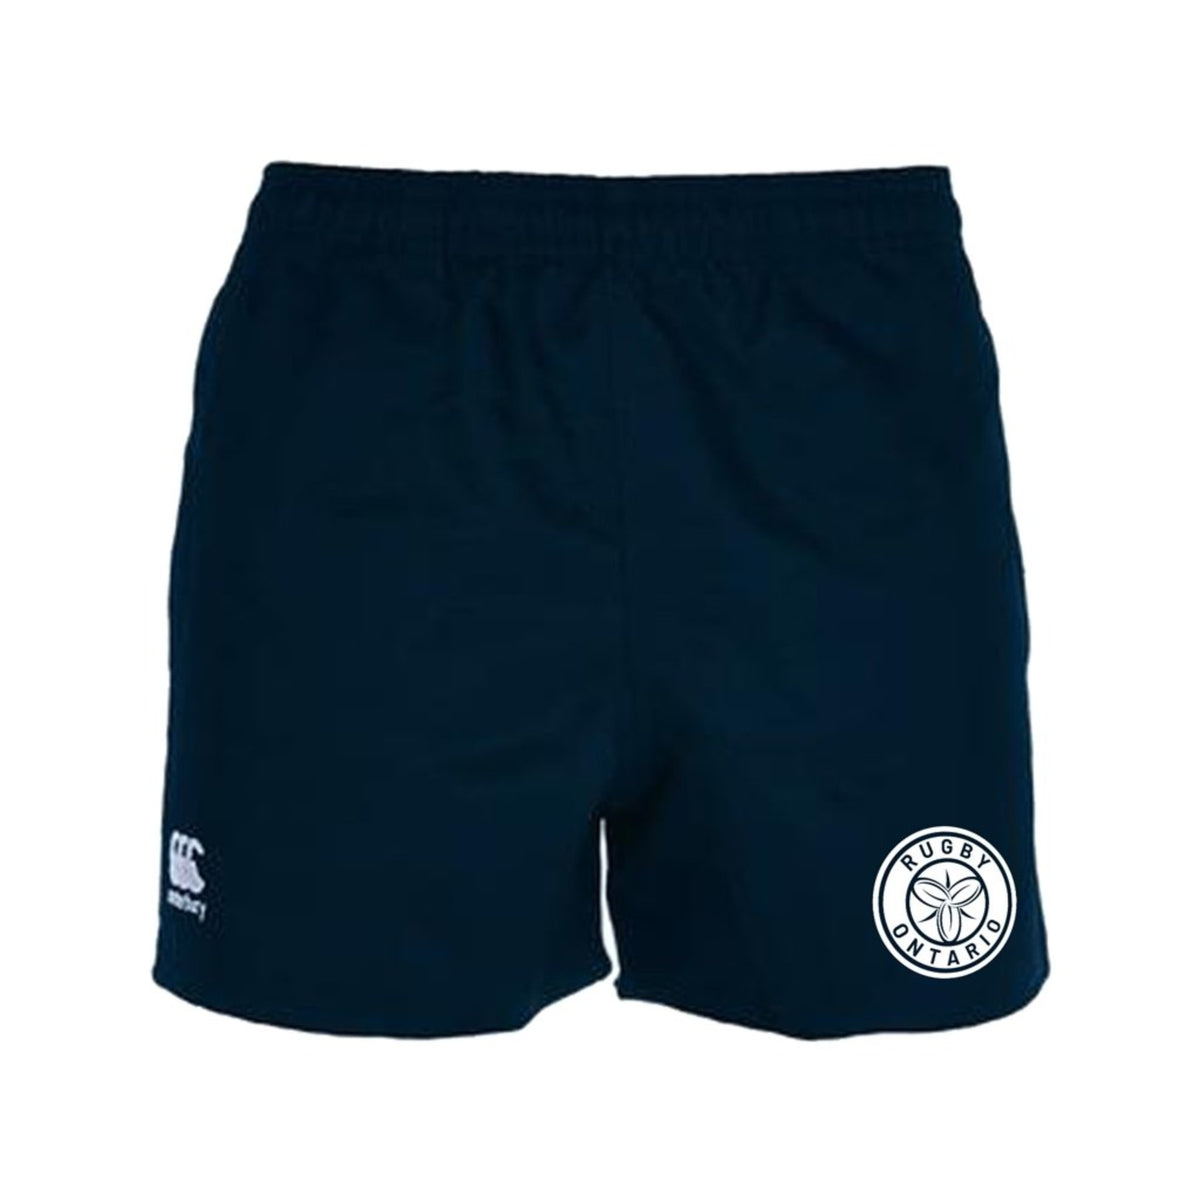 Rugby Ontario CCC AdvanTage Shorts - www.therugbyshop.com www.therugbyshop.com MEN&#39;S / NAVY / XS TRS Distribution Canada SHORTS Rugby Ontario CCC AdvanTage Shorts